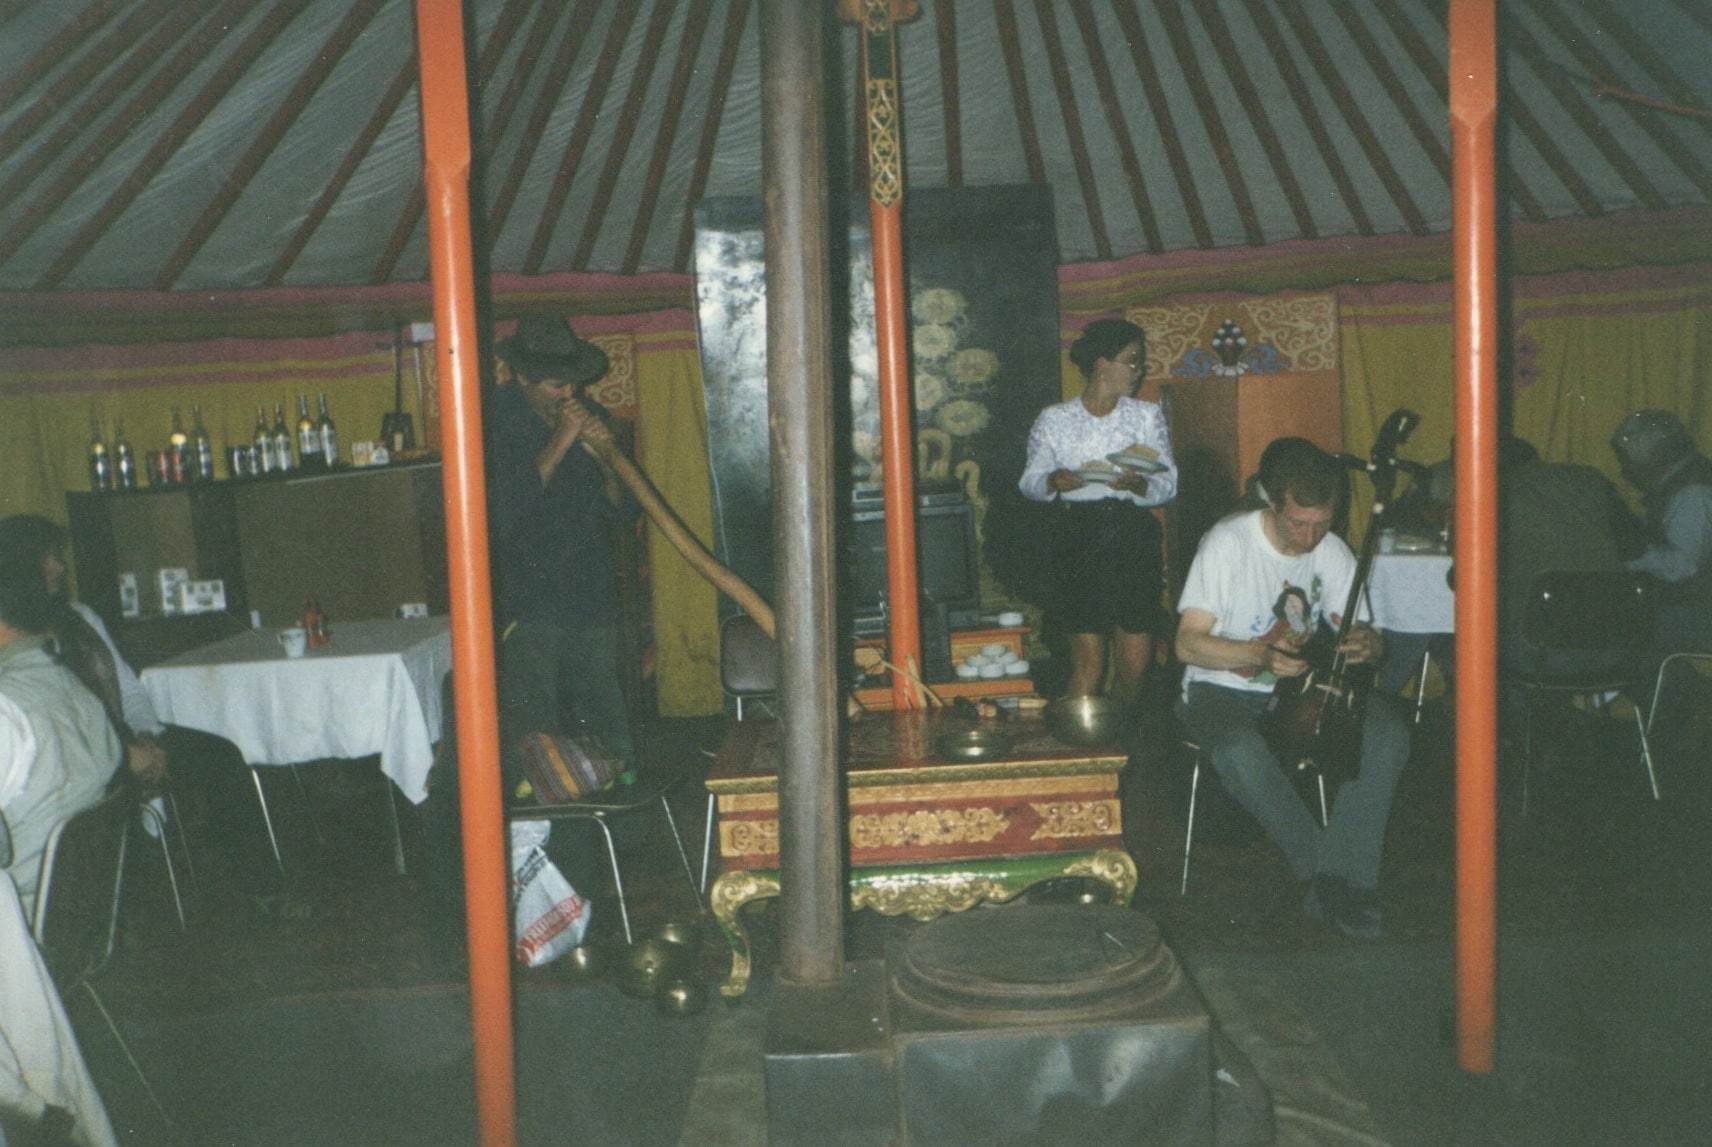 Michael and Jeff performing at a Roadside Guanz